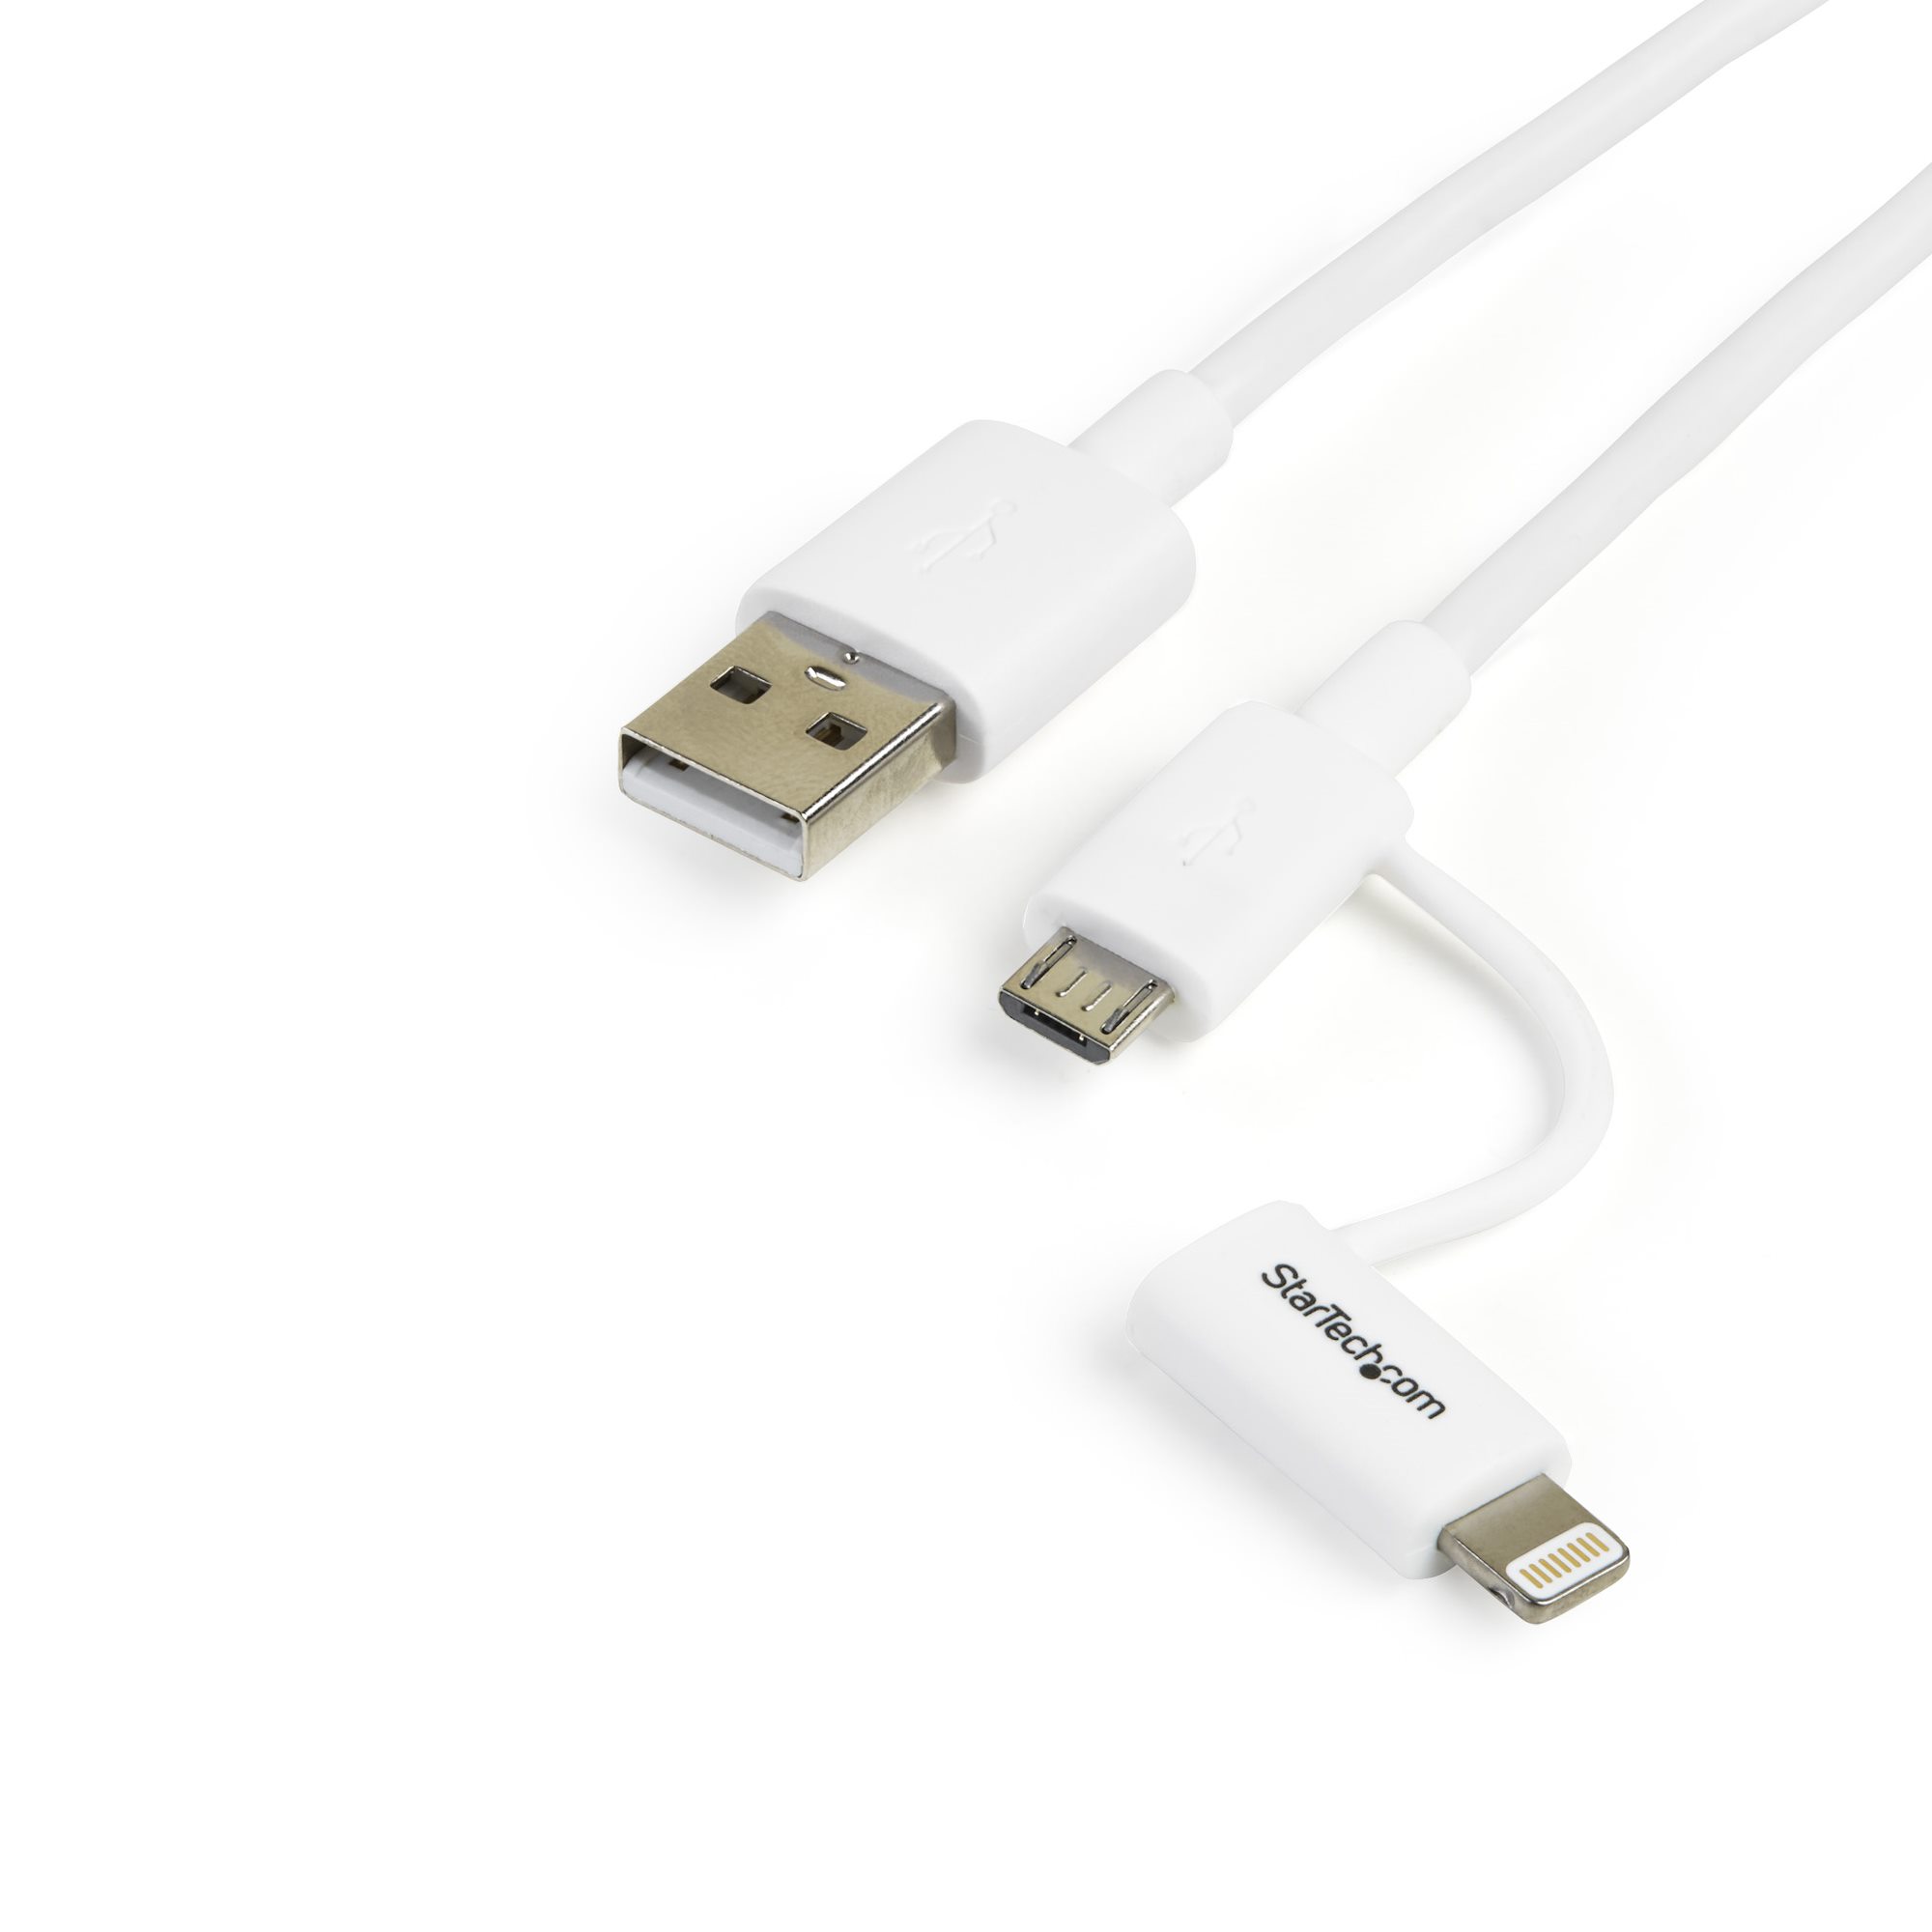 1m Lightning or Micro USB to USB Cable - Cables | StarTech.com